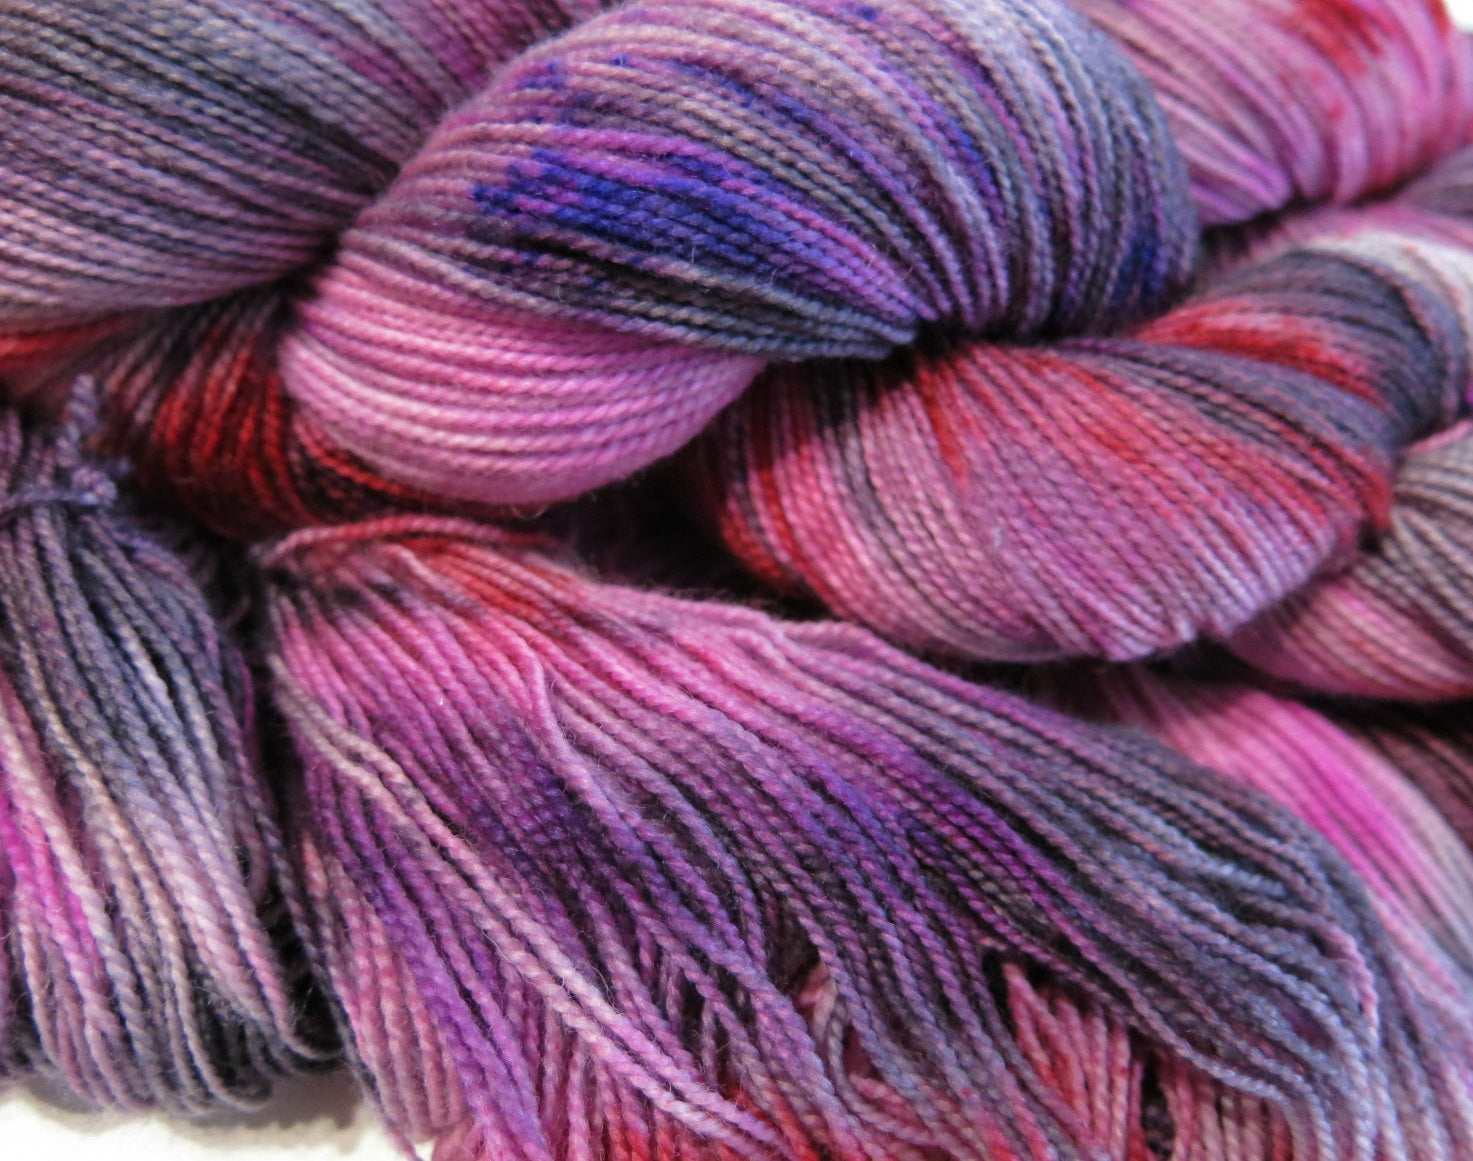 uv reactive yarn for festival and glow party knitting